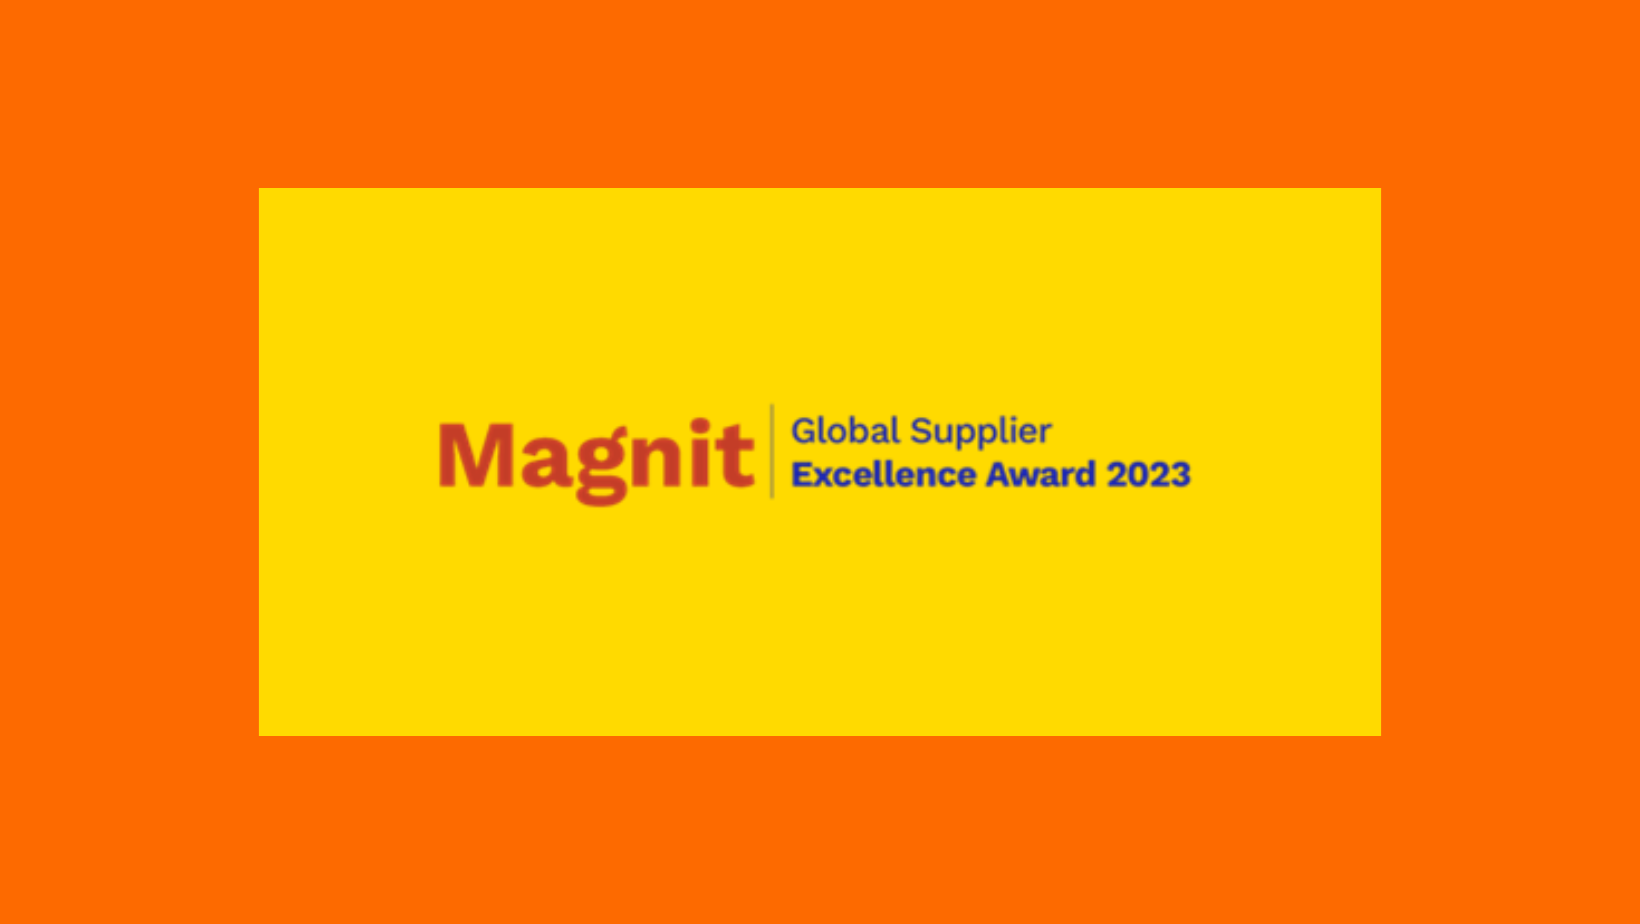 SPECTRAFORCE® Recognized as a Top-Performing Supplier by Magnit’s Inaugural Global Supplier Excellence Awards